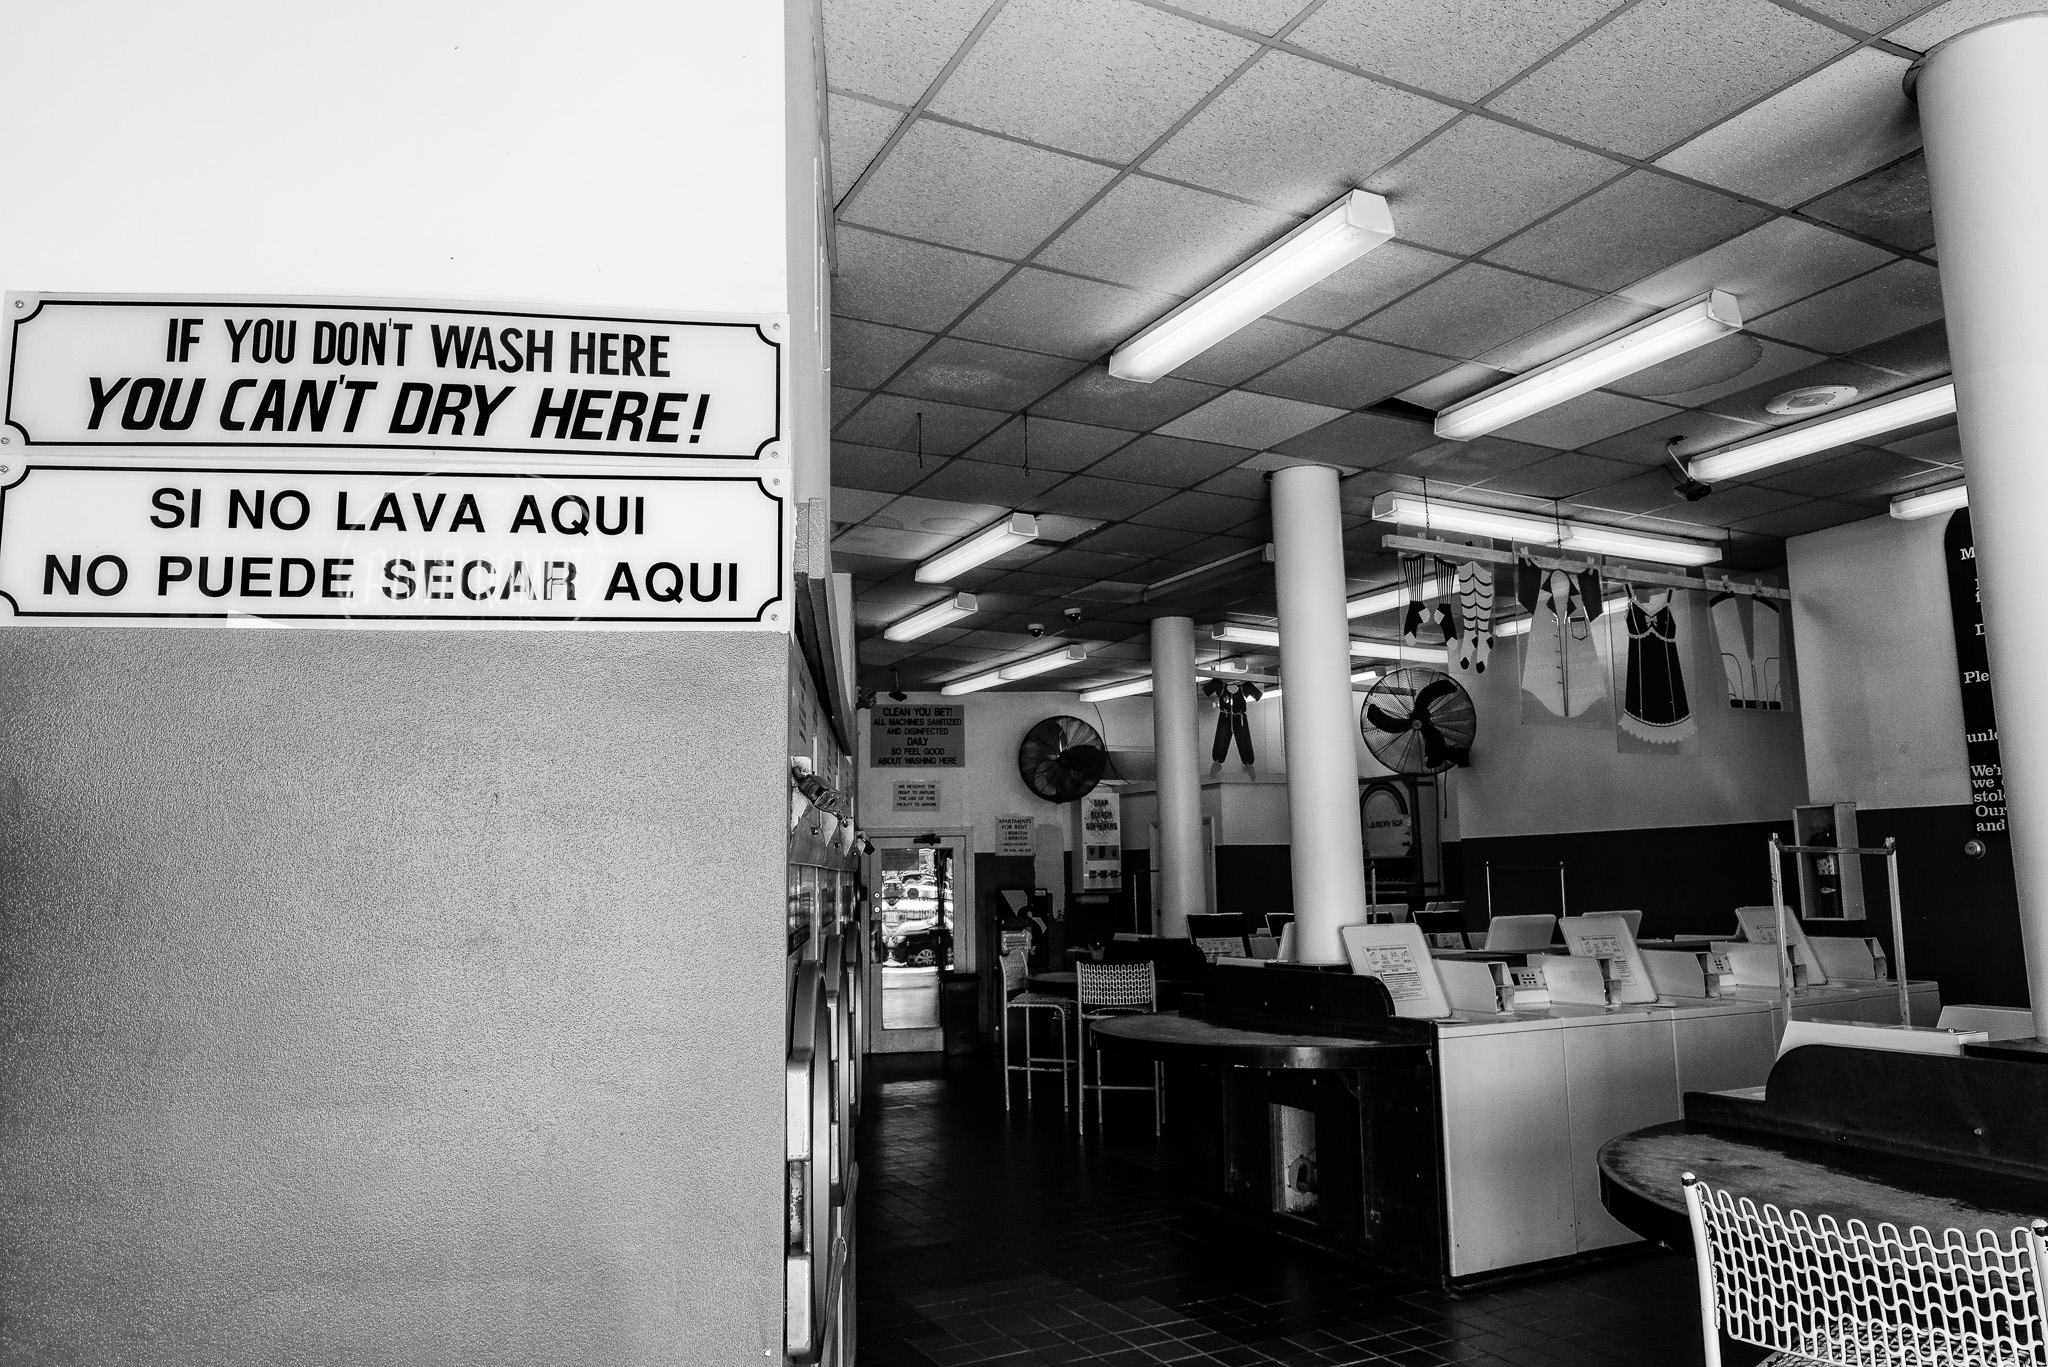 black and white image of a washroom with no paper or laundry items